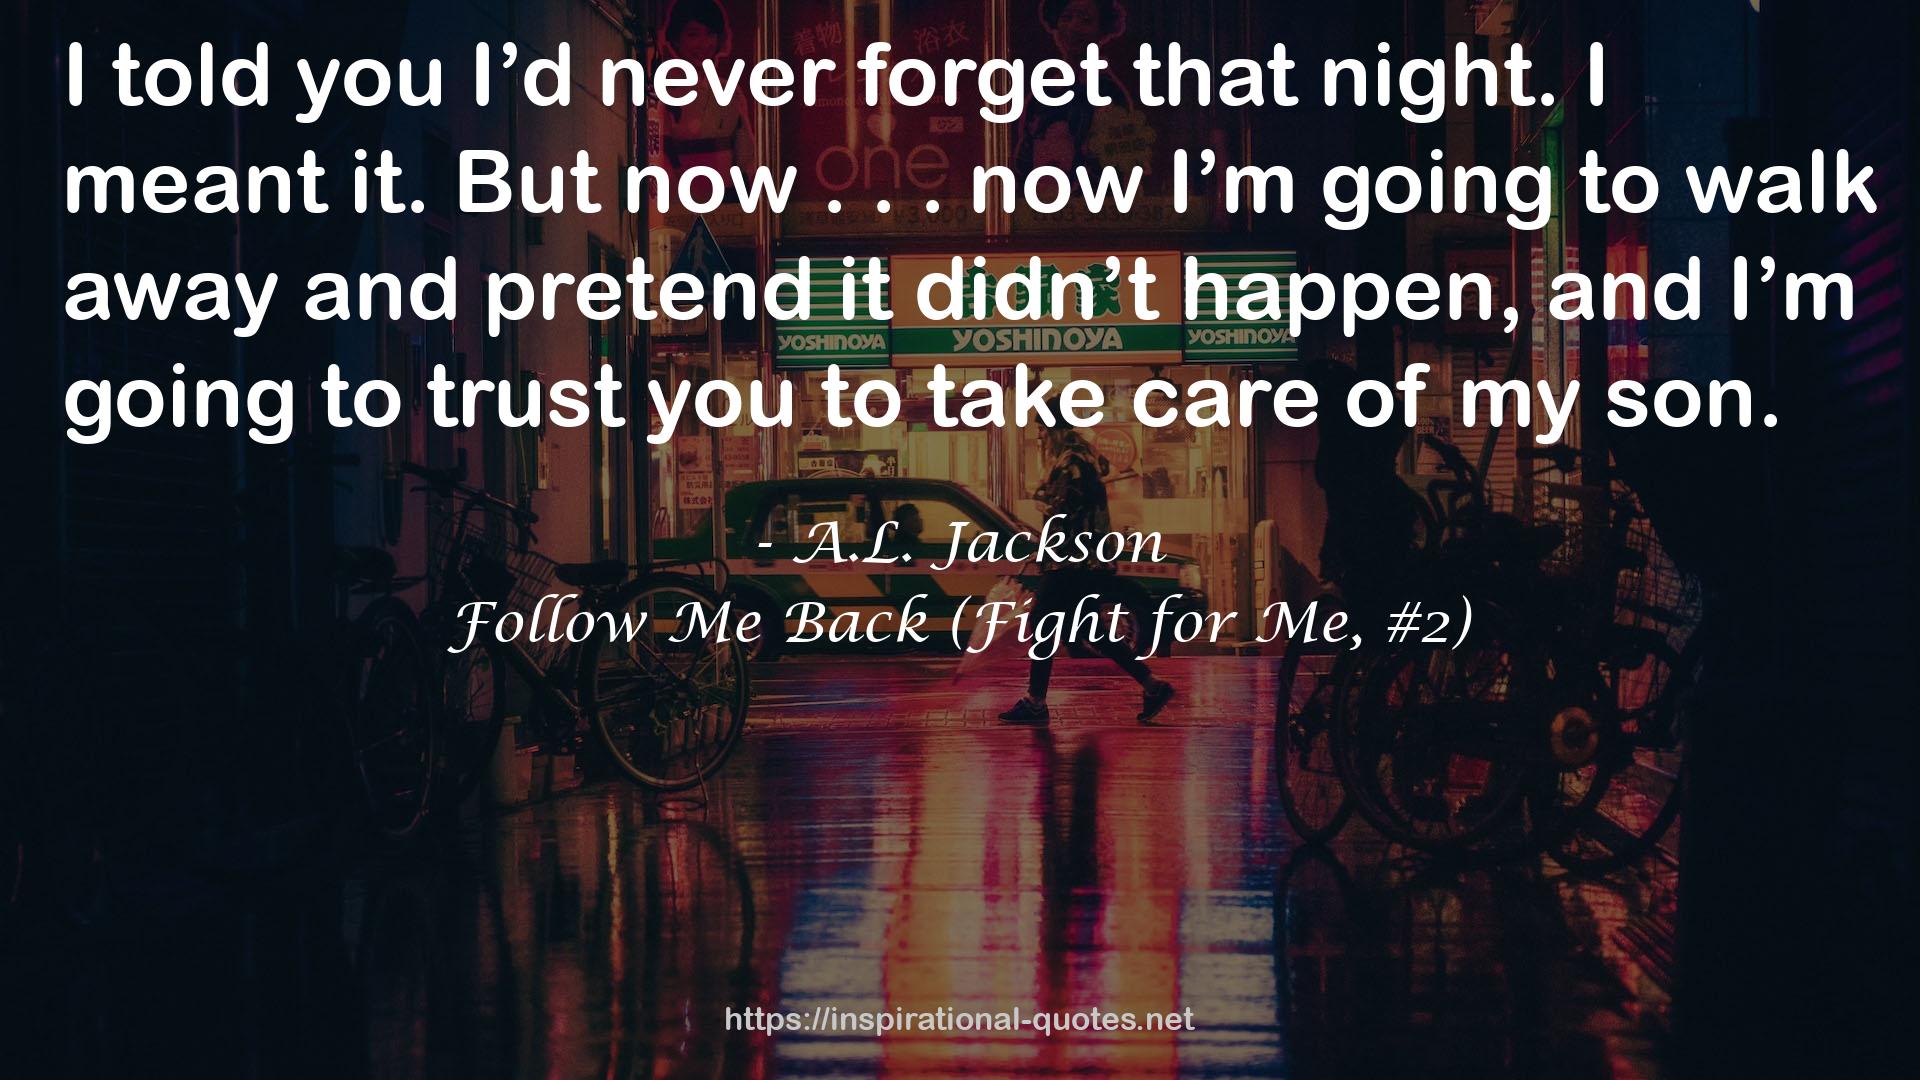 Follow Me Back (Fight for Me, #2) QUOTES